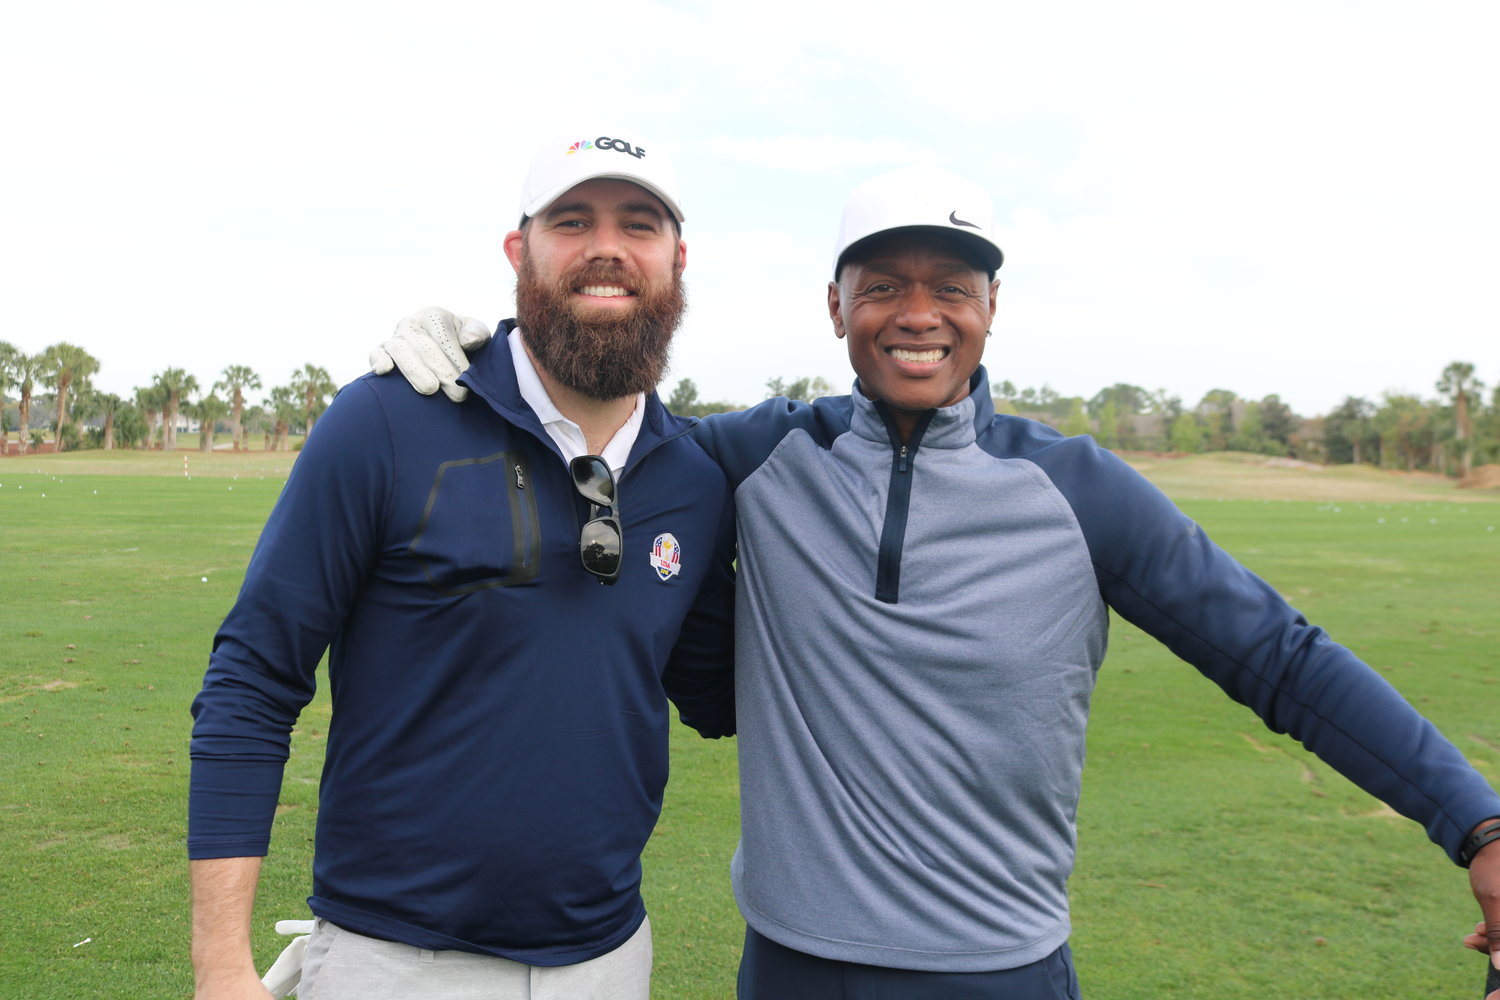 Jordan Davis and Javier Colon at the golf tournament at Sawgrass Country Club